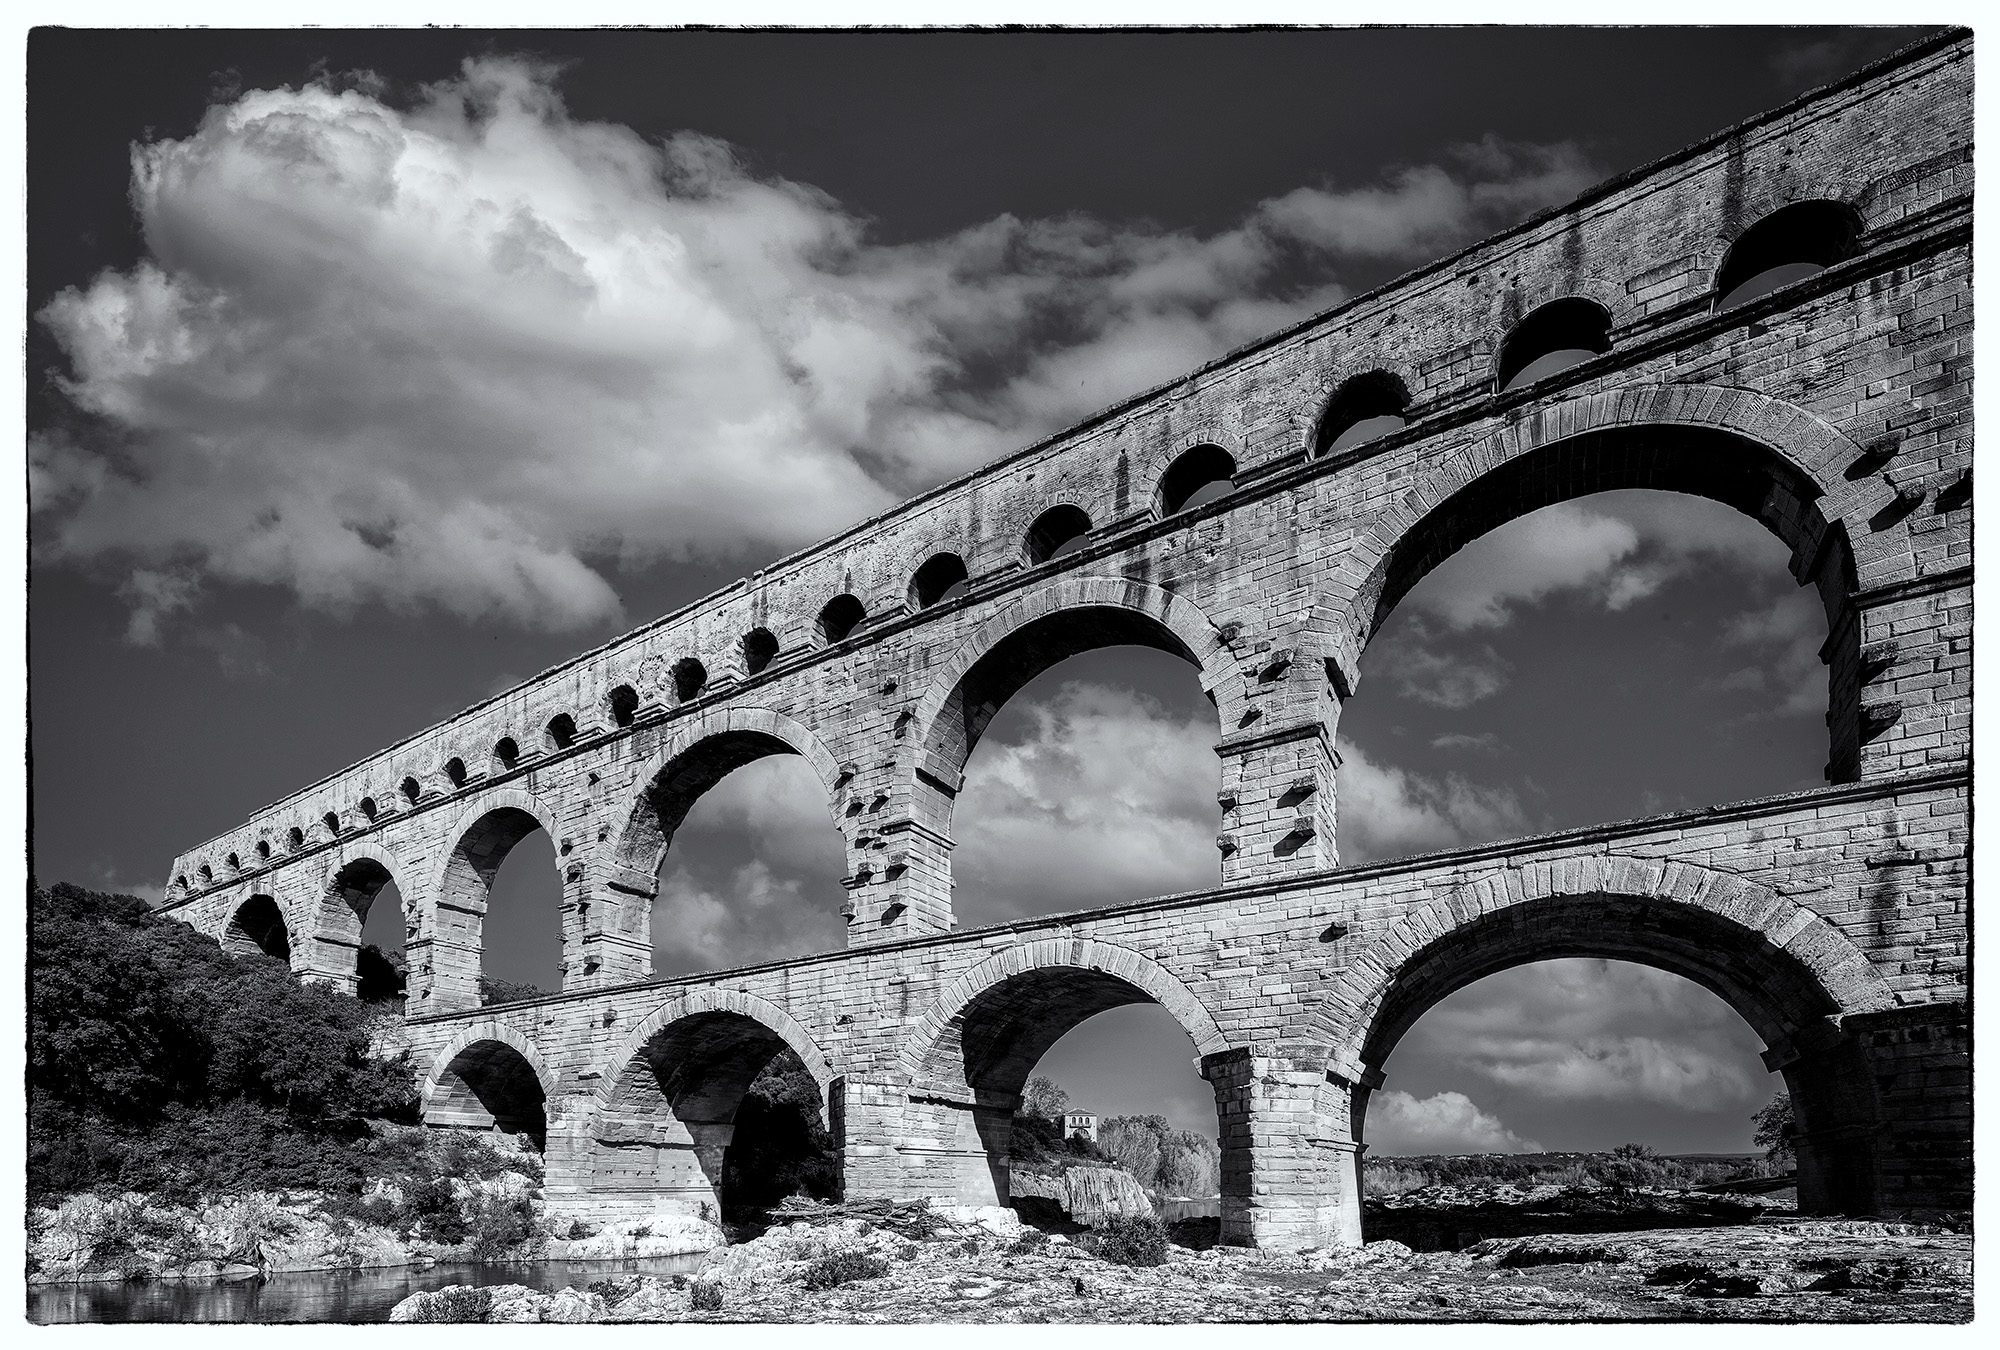 This Black & White image, taken at Pont du Gard, France, captures the awe-inspiring Roman aqueduct that has defied time and stands...